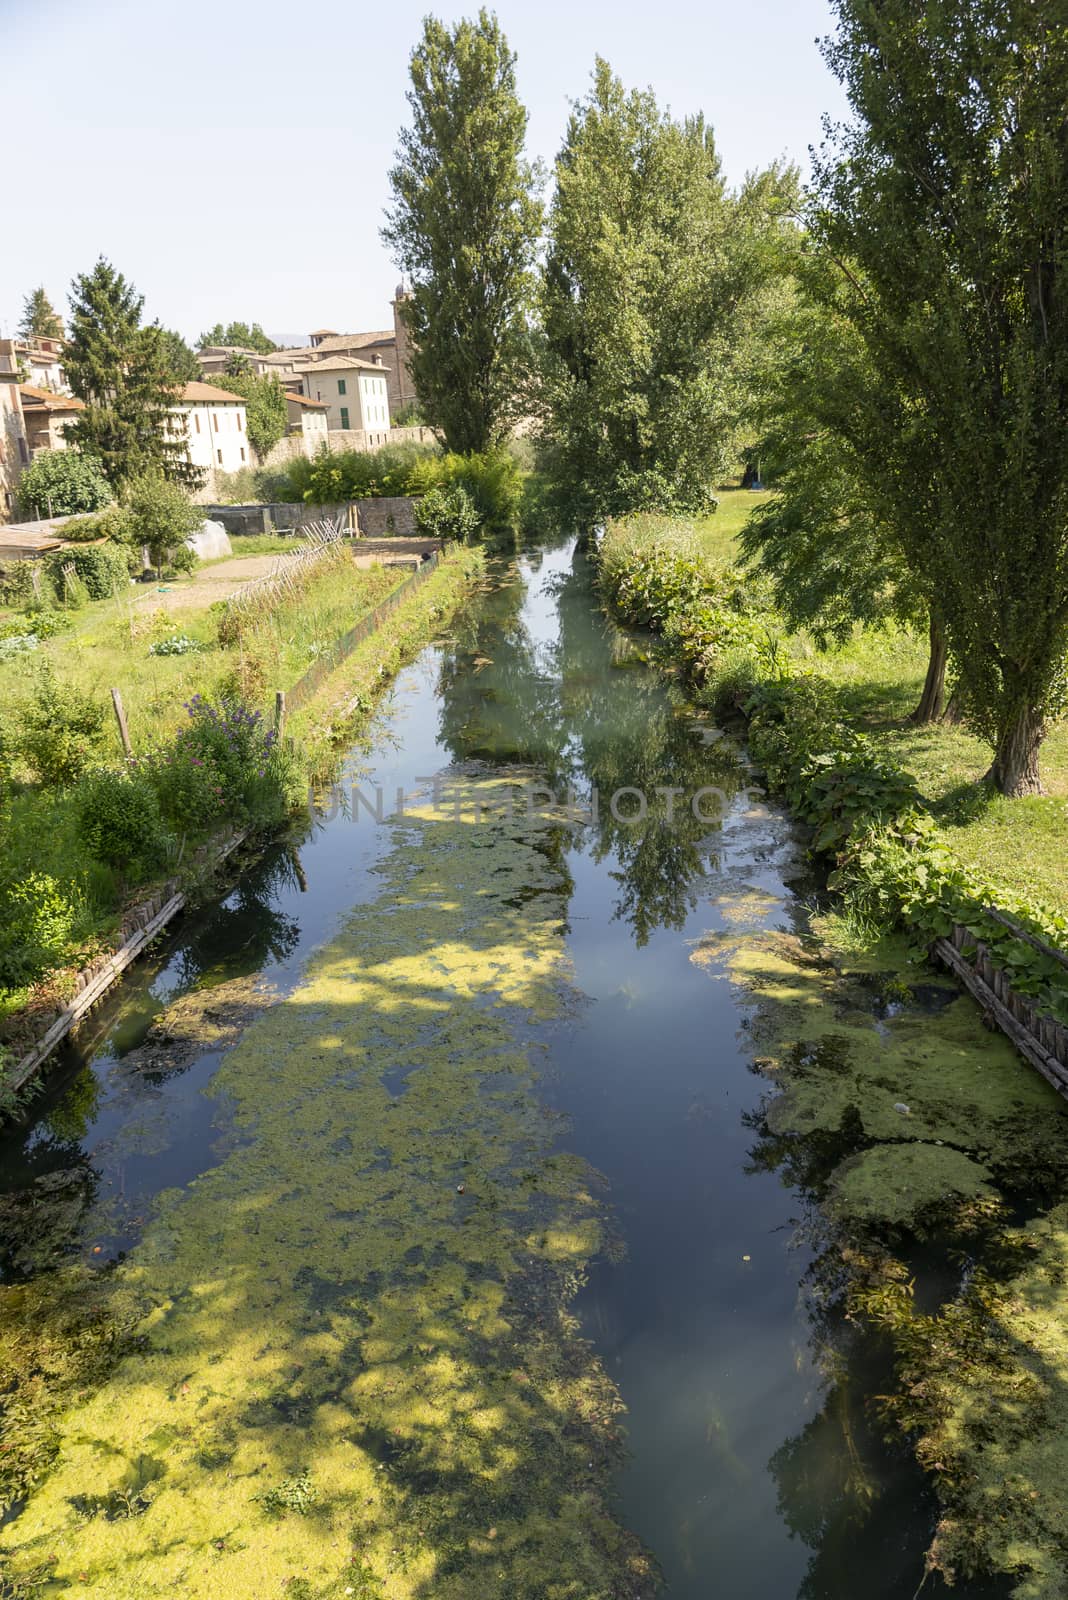 Small river that passes outside the town of Bevagna by carfedeph